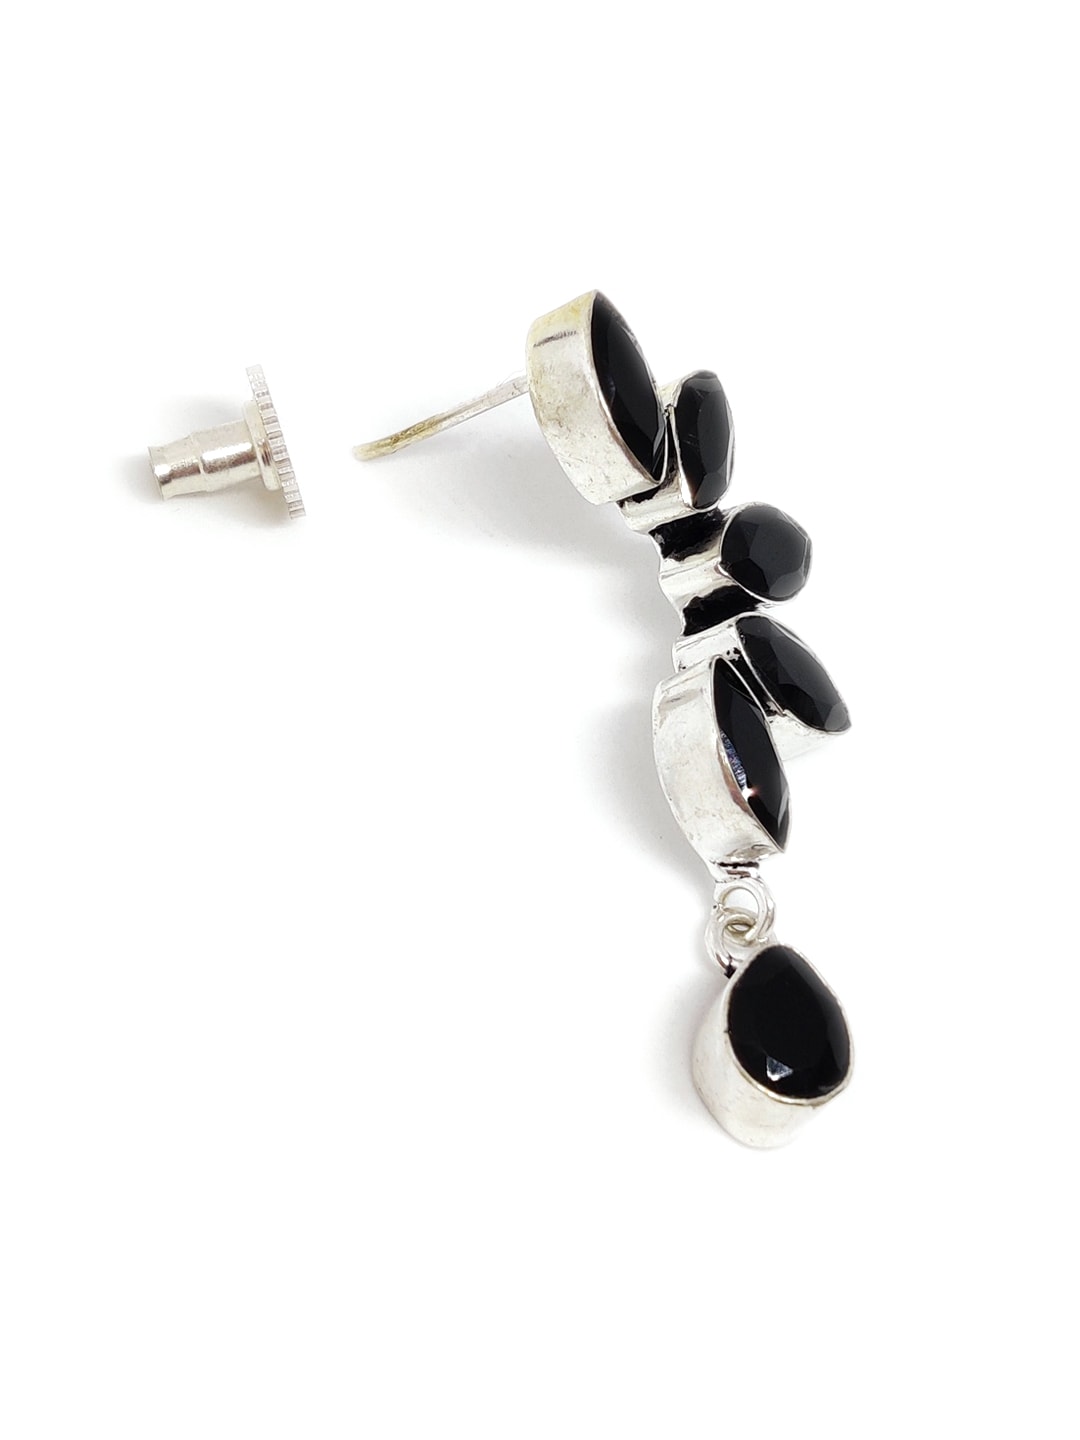 EL REGALO Silver-Toned & Black German Silver Floral Drop Earrings - for Women and Girls
Style ID: 16770284